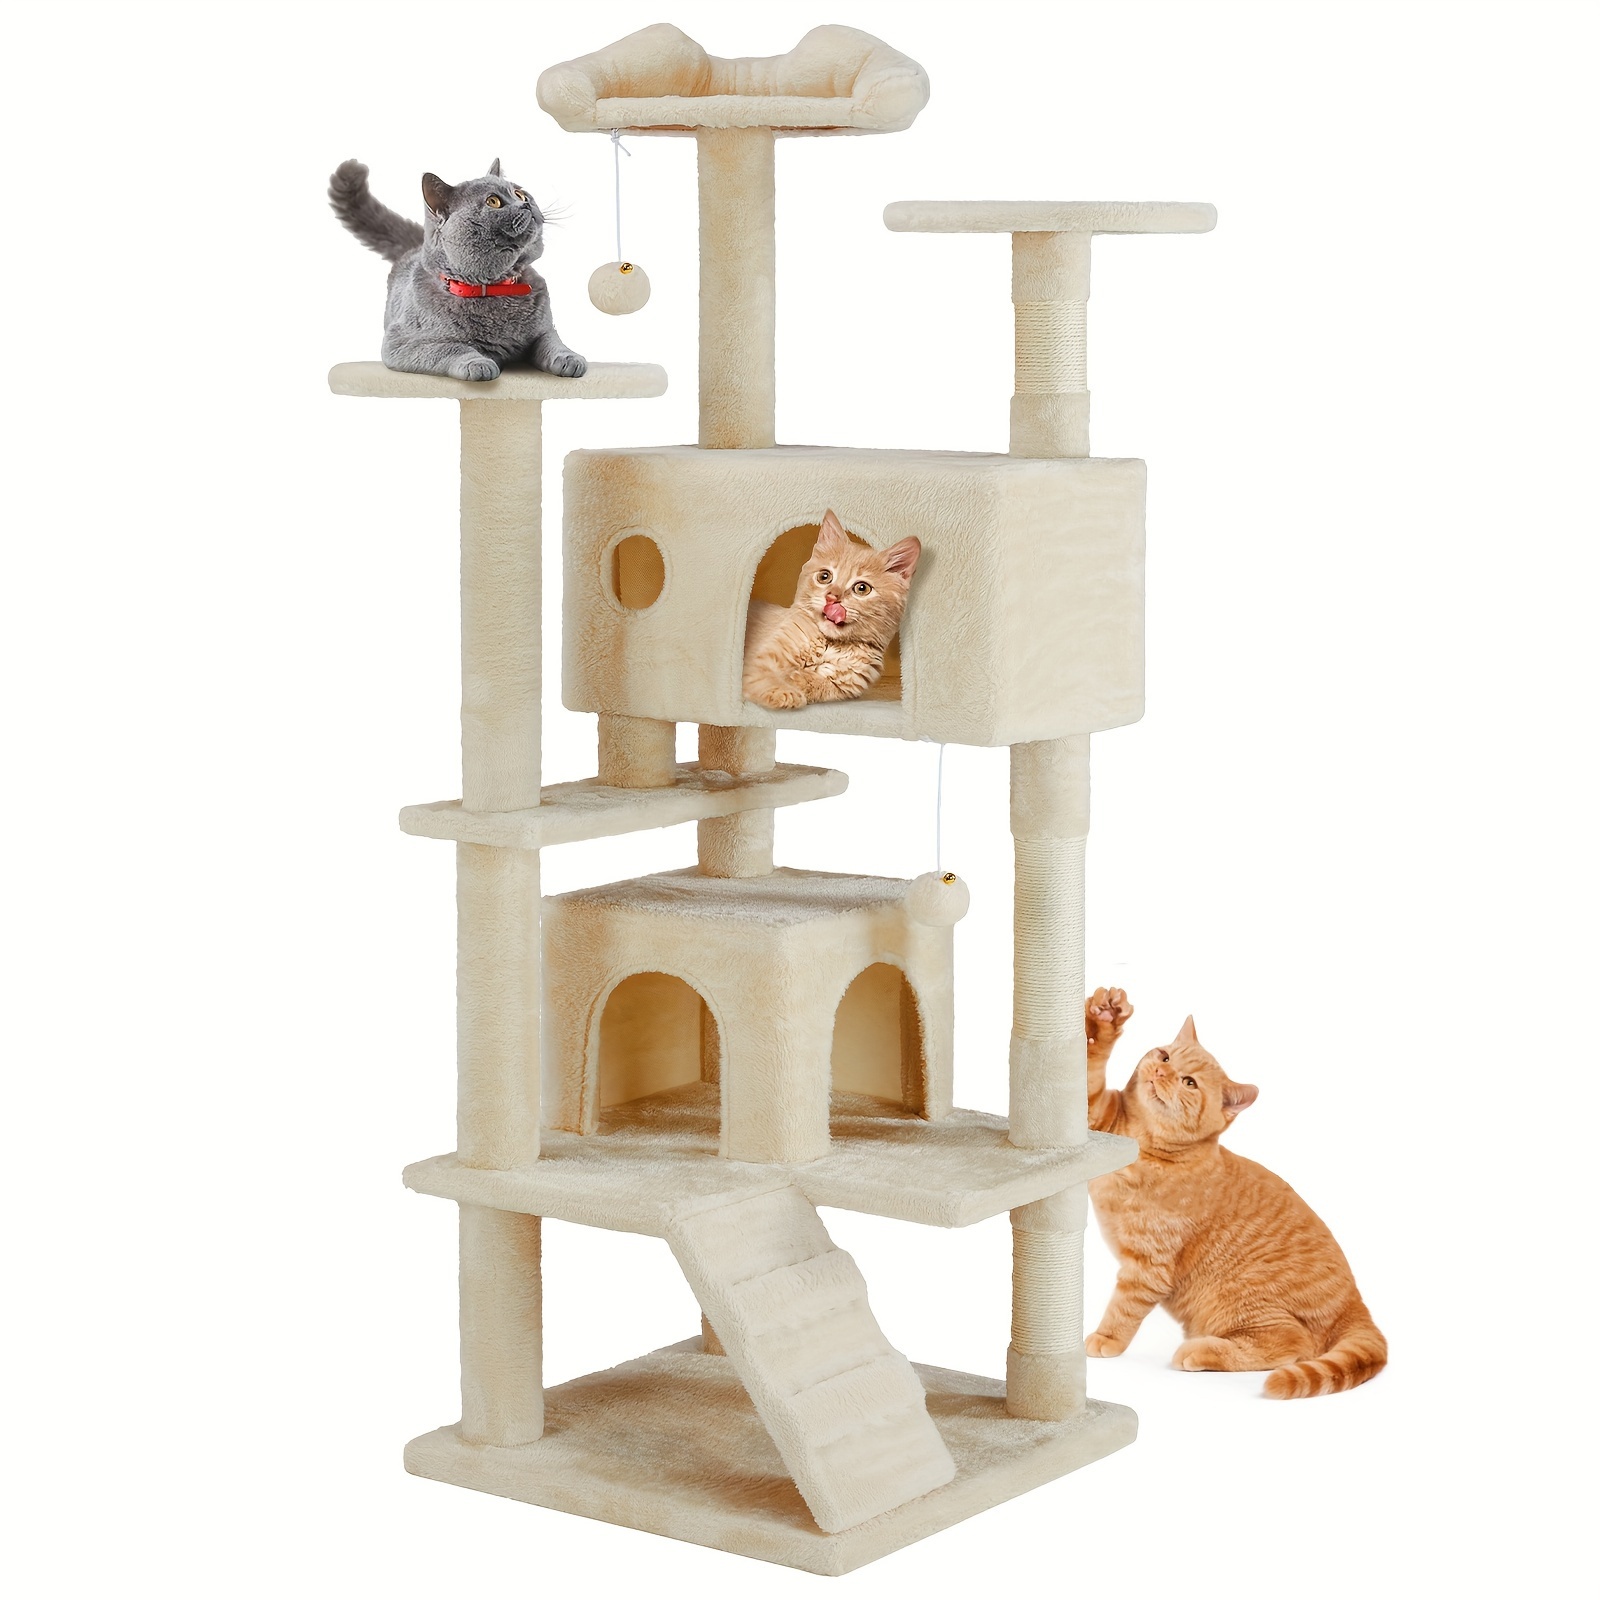 

54 In Tall Cat Tree Cats Multi-level Tower House With Large Condo, Natural Sisal Scratching Post, Climbing Ladder, Dangling Toy For Kitty, Kitten, Wall Mount